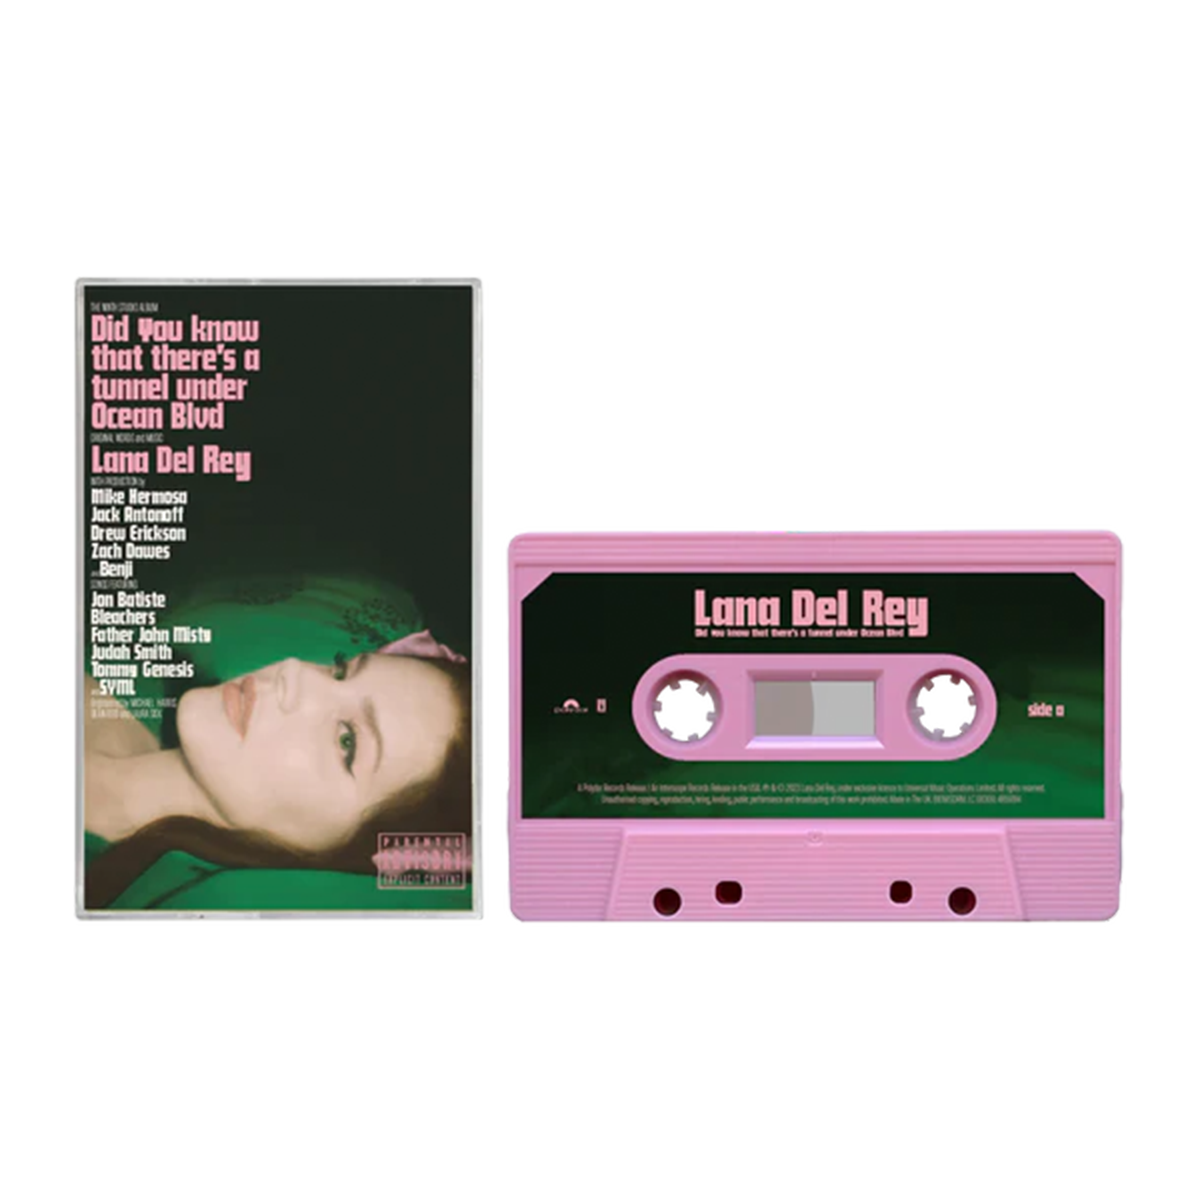 Lana Del Rey - Did You Know That There's a Tunnel Under Ocean Blvd: ALT Cover Cassette #3